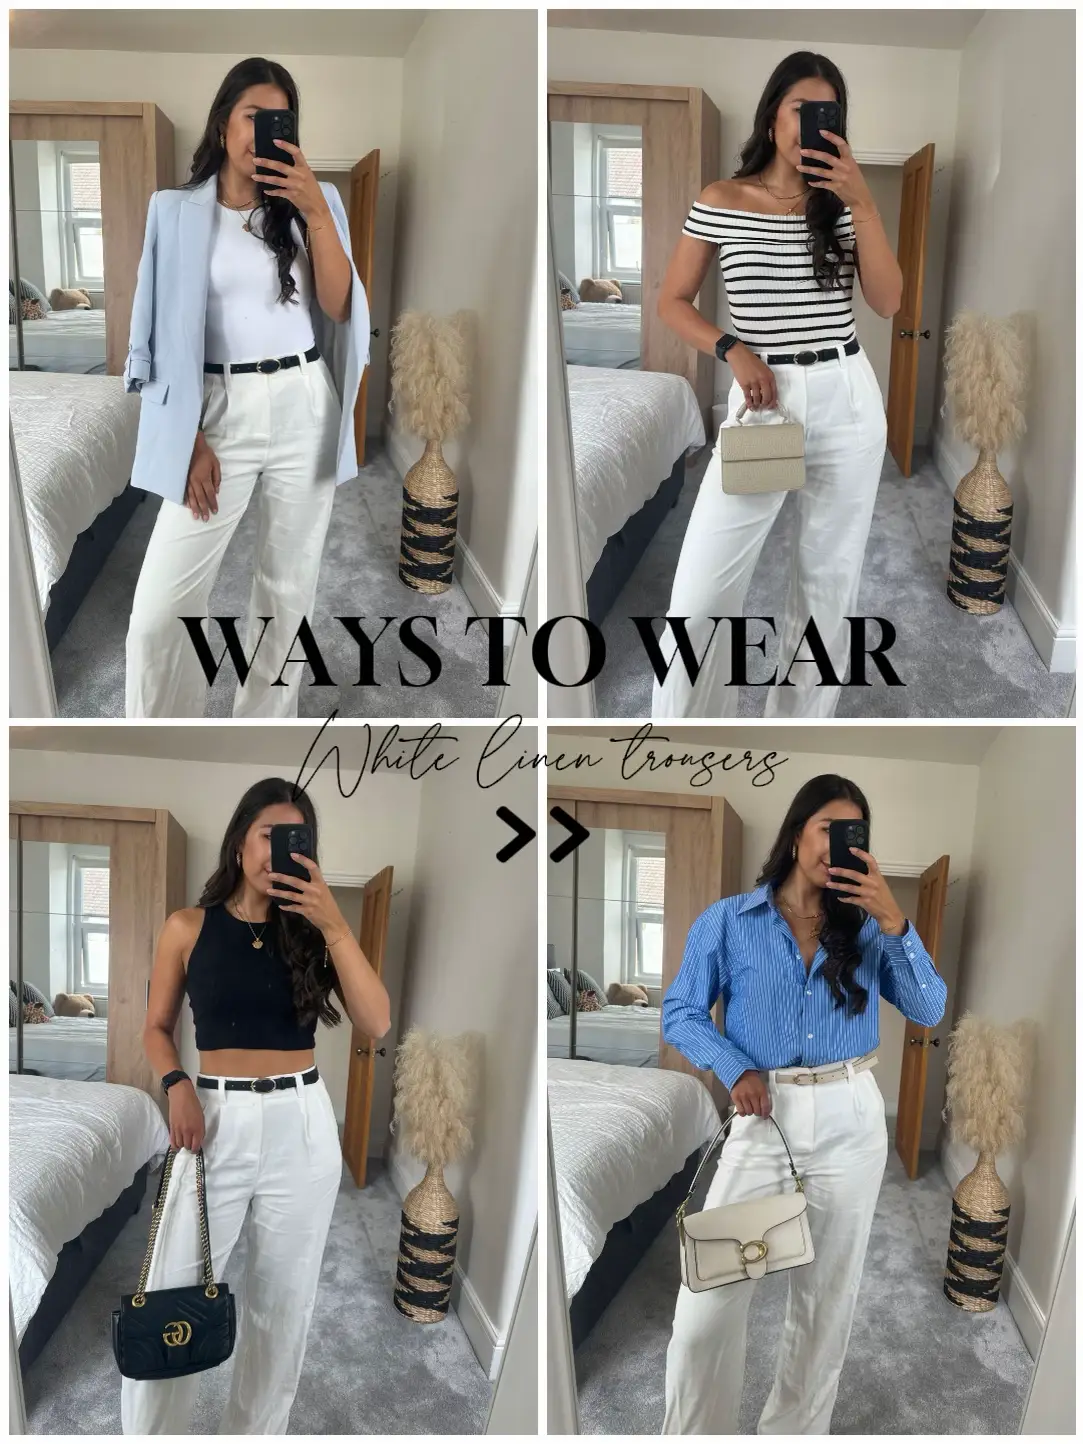 Ways to wear white linen trousers🤍, Gallery posted by Kaatherineo_